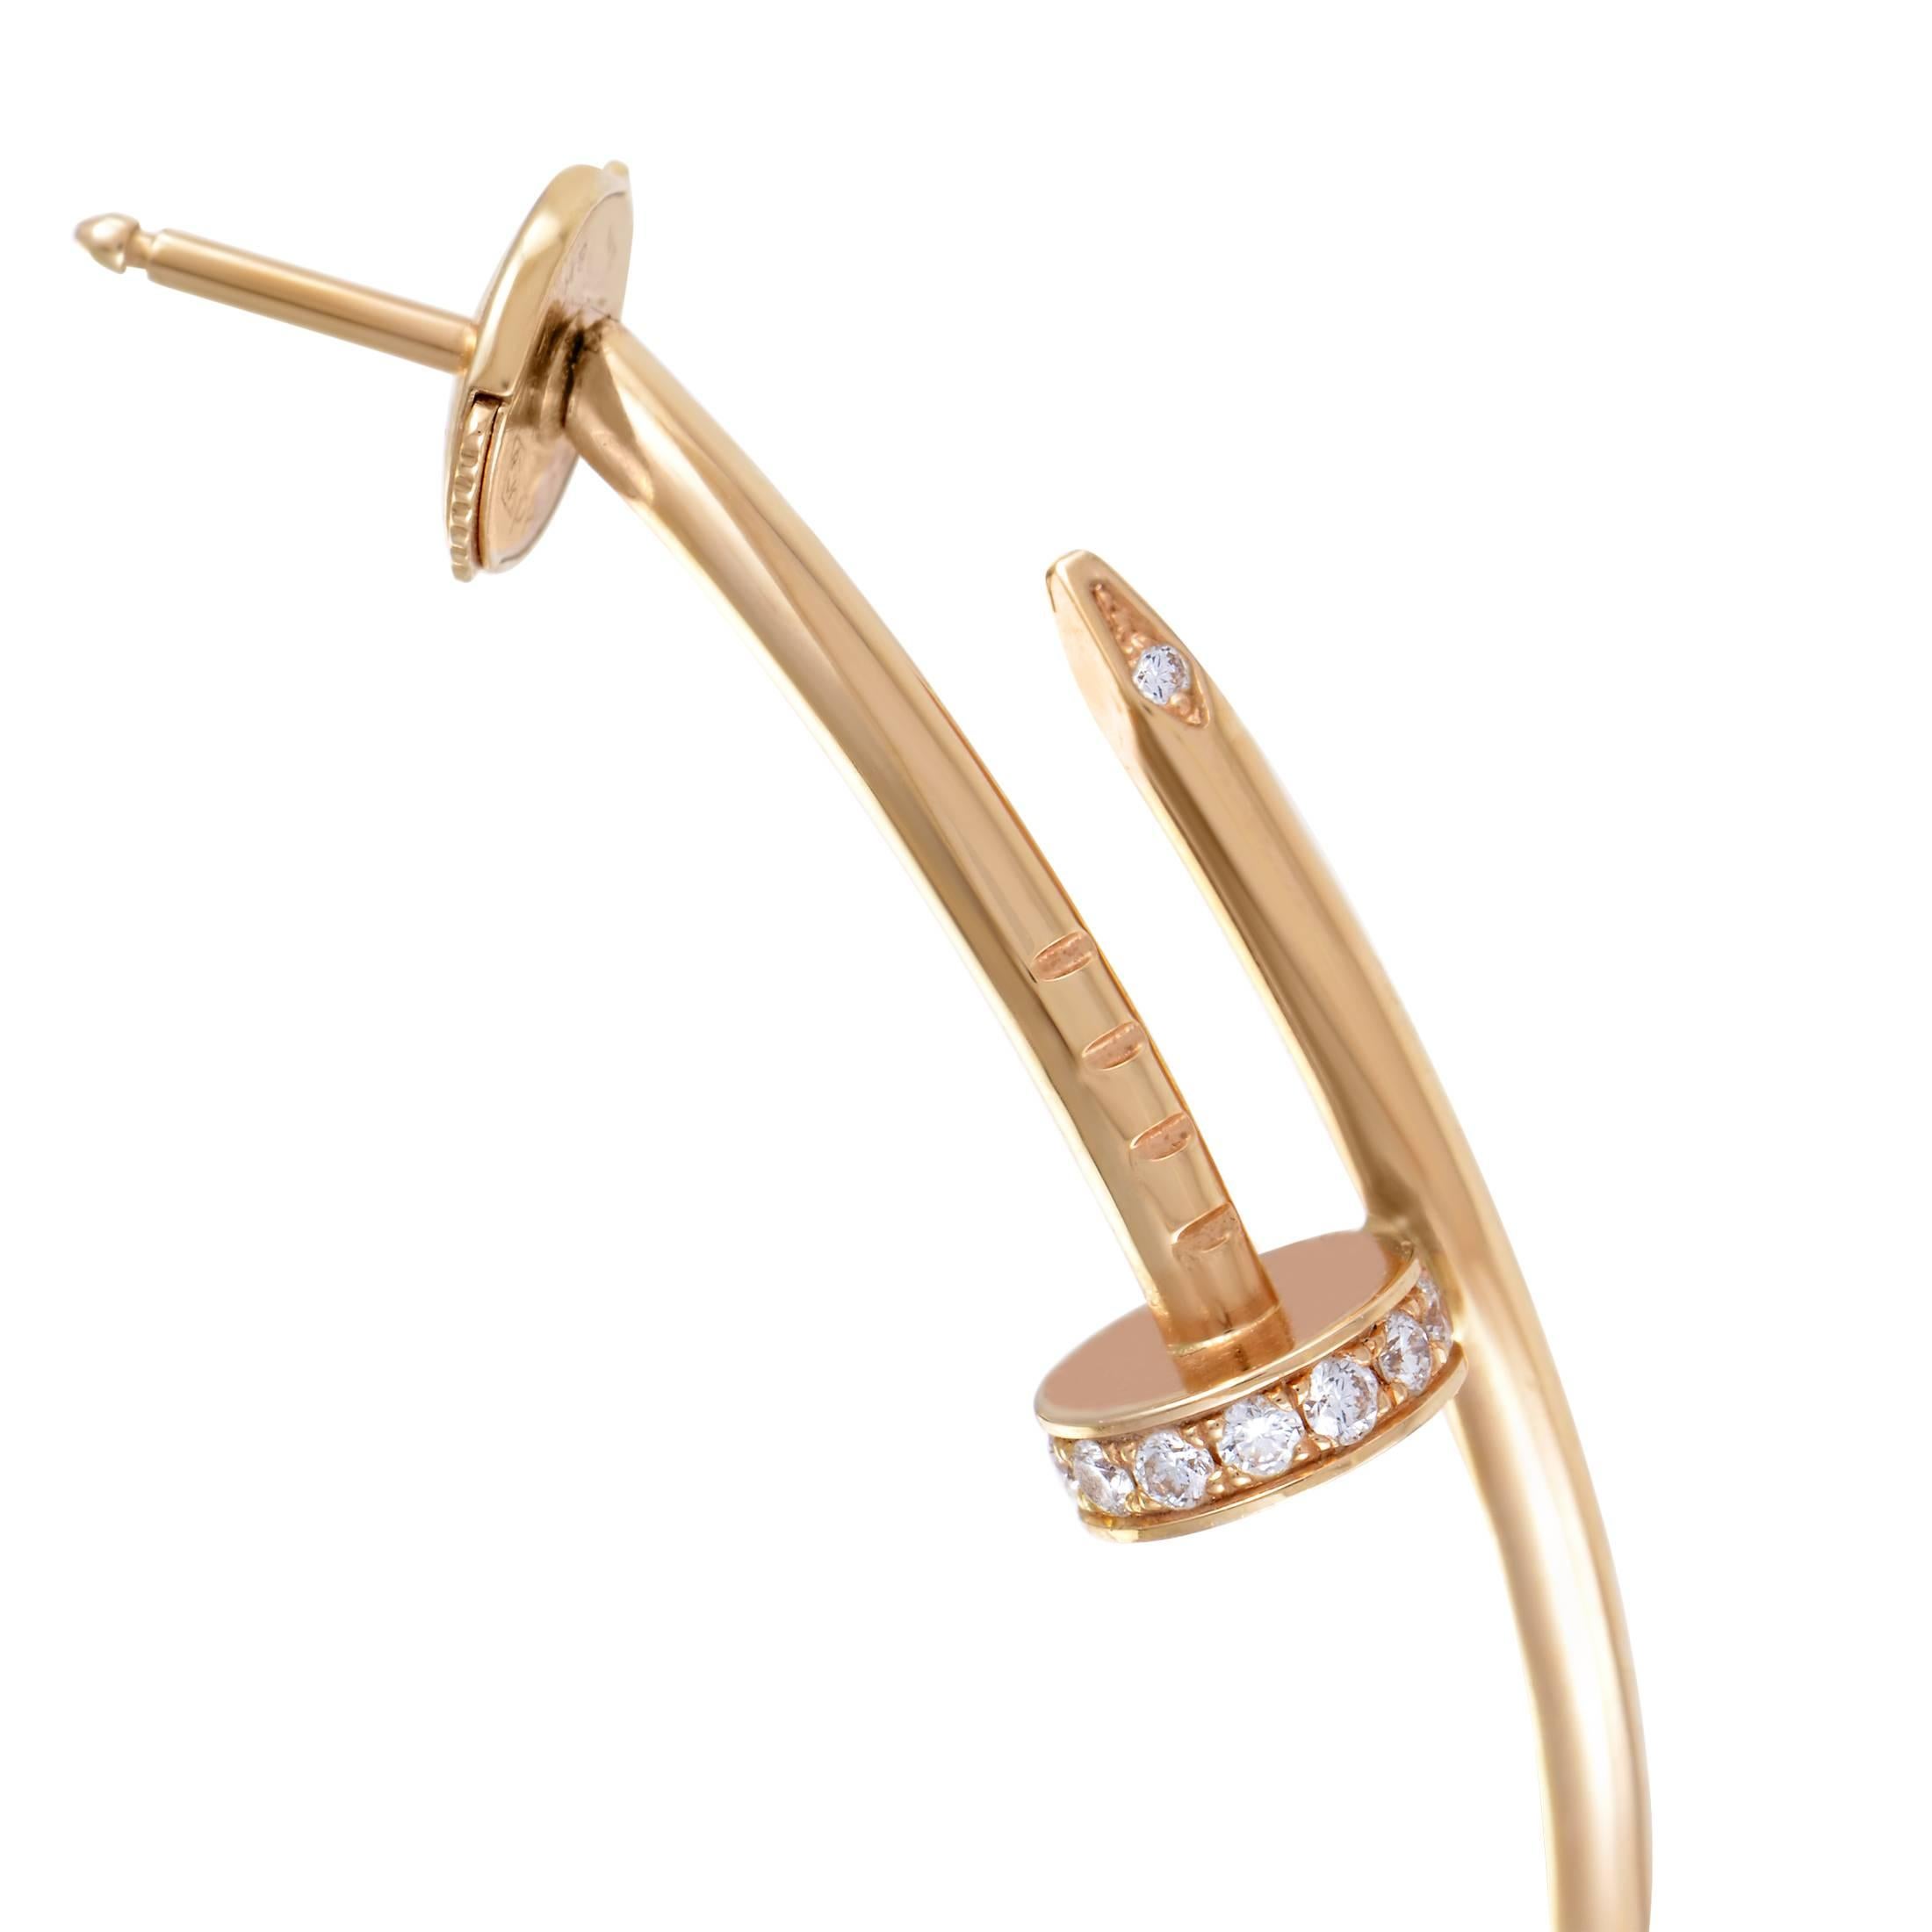 These iconic hoop earrings from the Cartier Juste un Clou collection bring one of the brand’s signature elements to life. Sleek and simple, the “nail” shaped design is crafted from radiant 18K Rose Gold. An array of diamonds add an exquisite